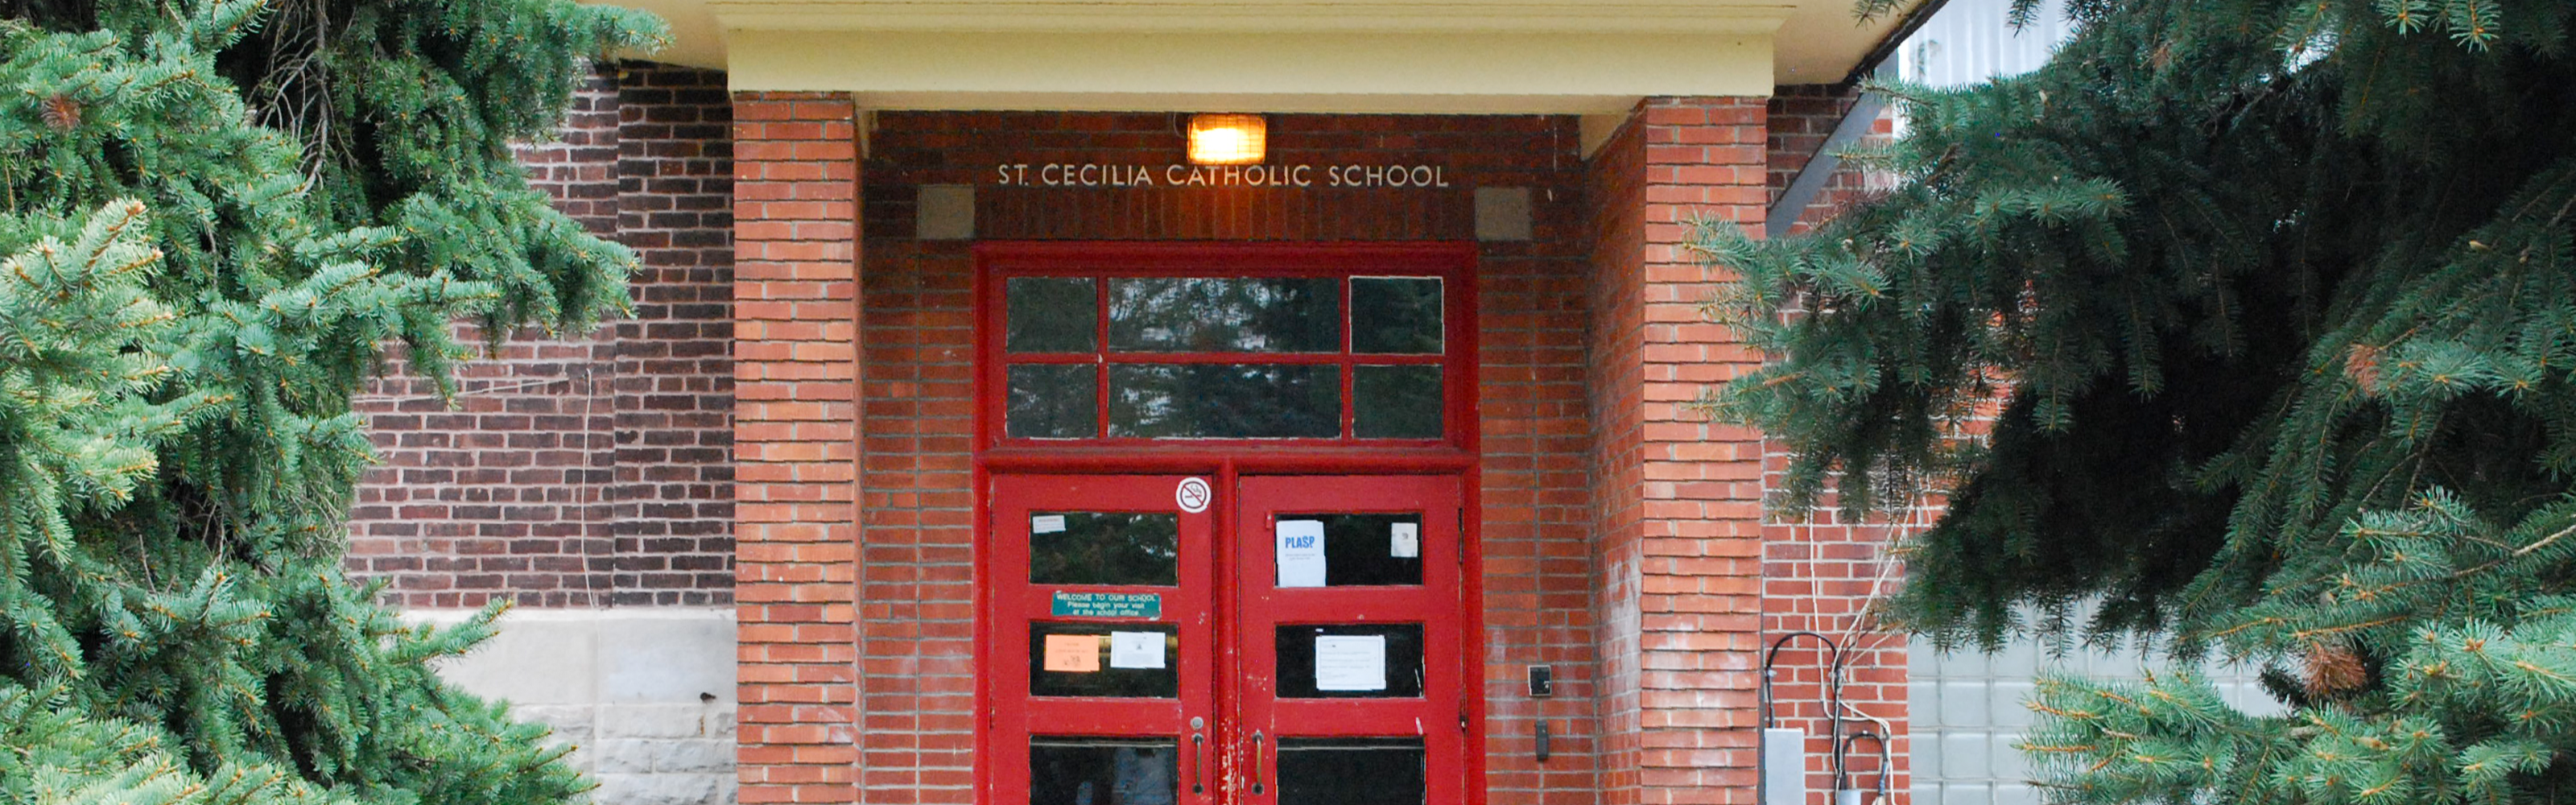 The front of the St. Cecilia Catholic School building.